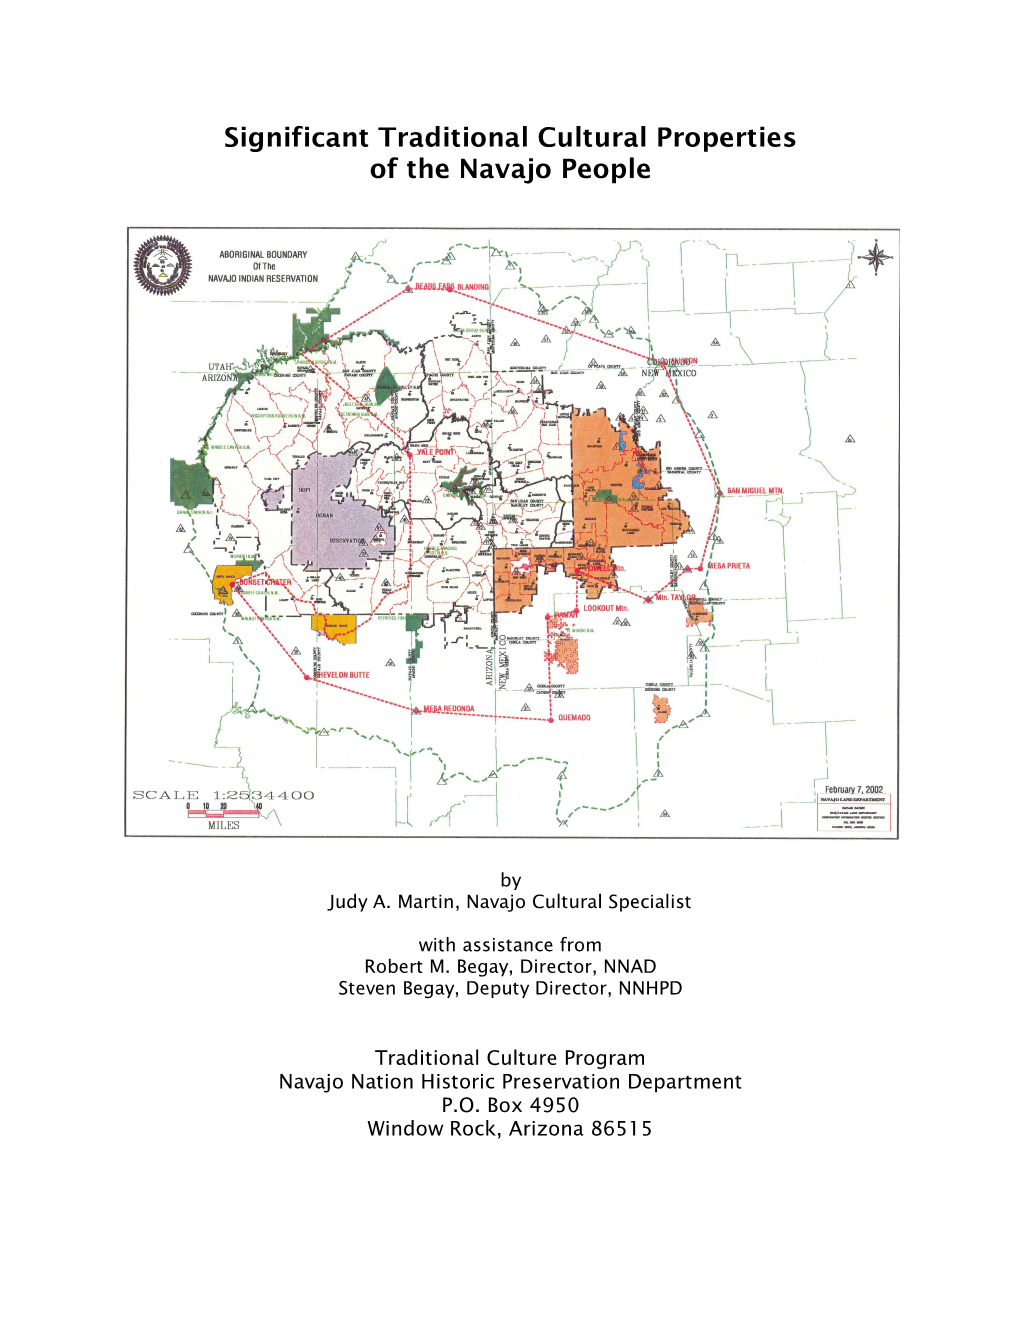 Significant Traditional Cultural Properties of the Navajo People